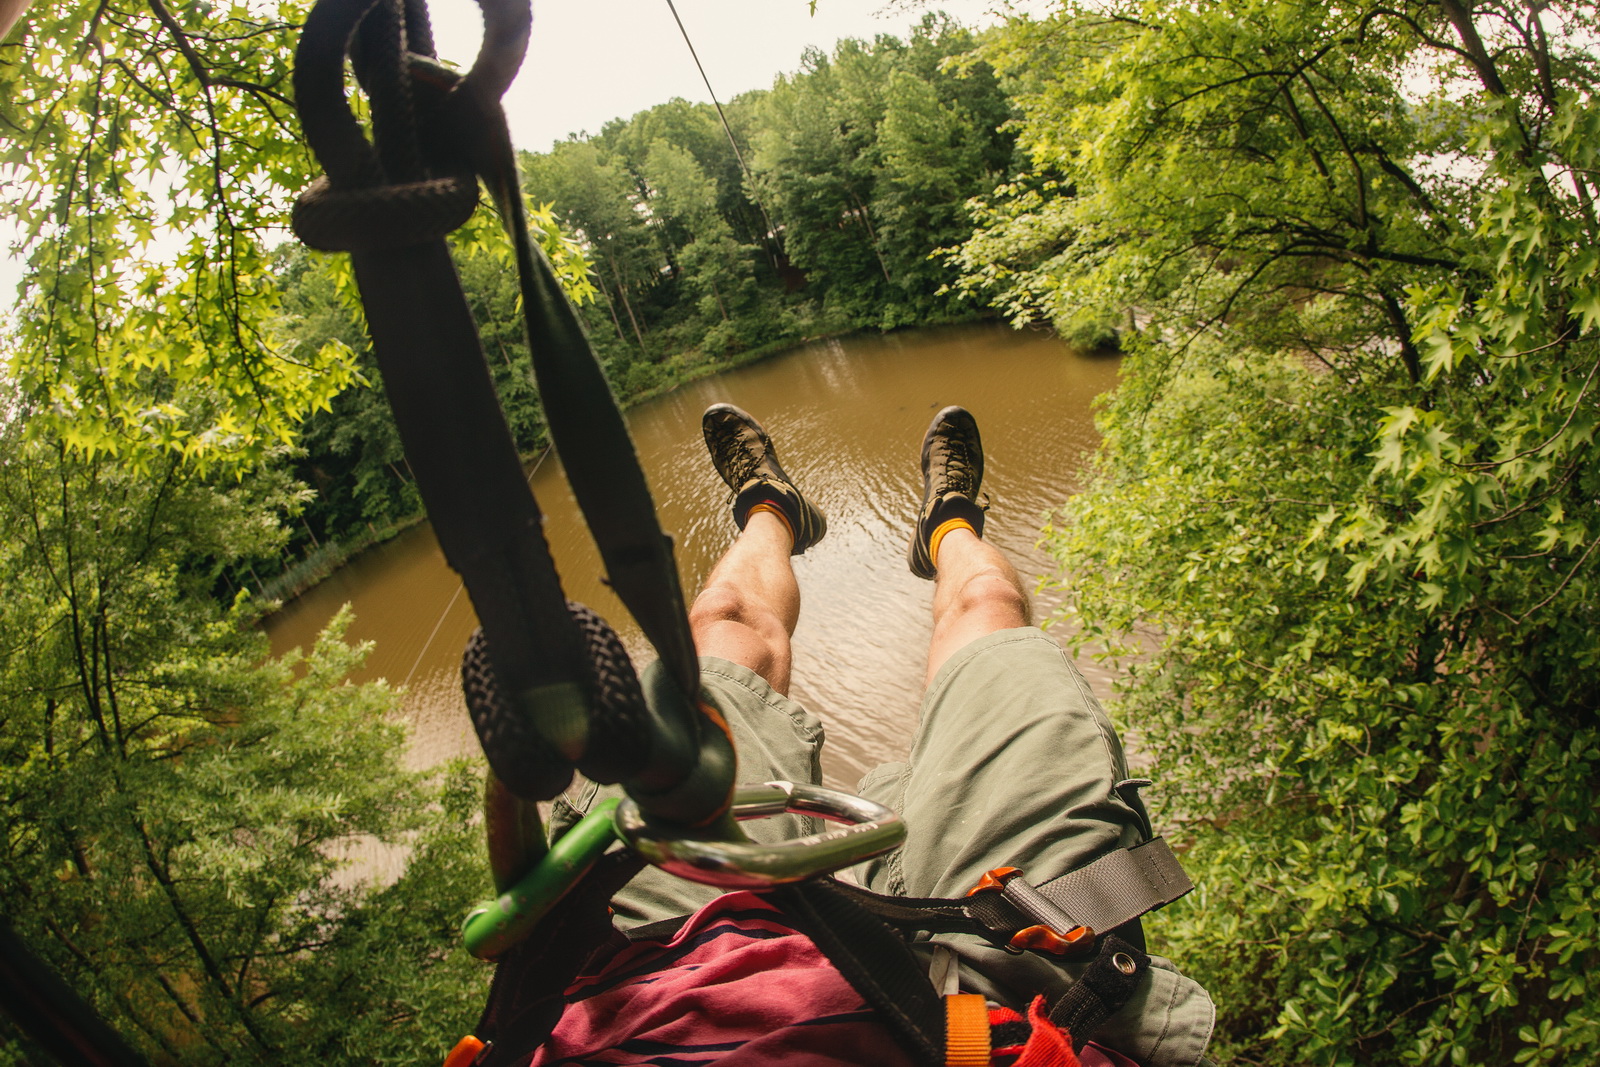 Ziplining at Go Ape Treetop Adventure Course at Lums Pond State Park